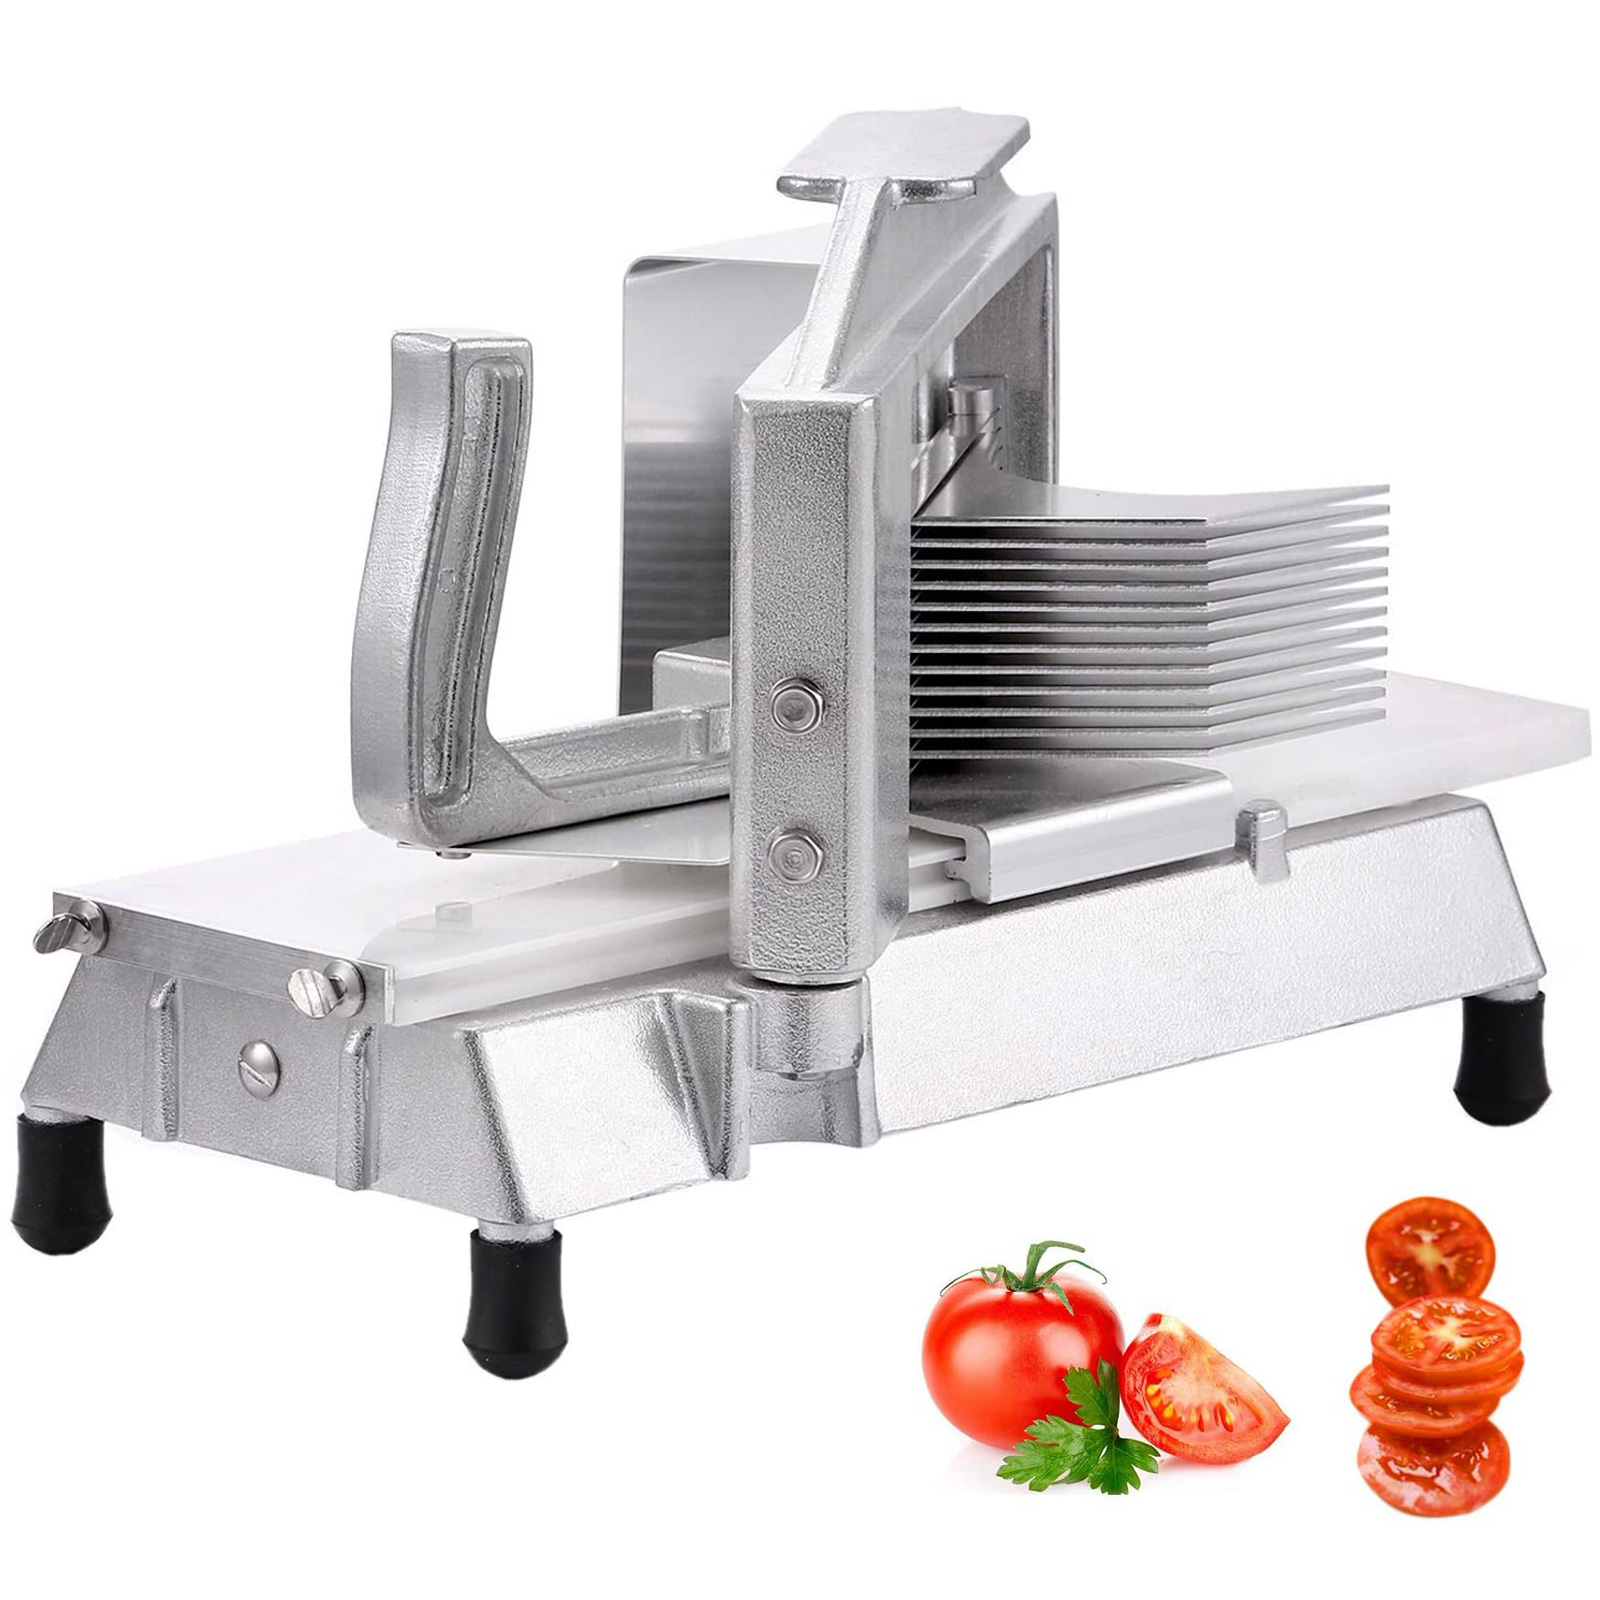 Commercial Tomato Slicer Cutter 3/16" Industrial Choppers Kitchen Cutting от Vevor Many GEOs